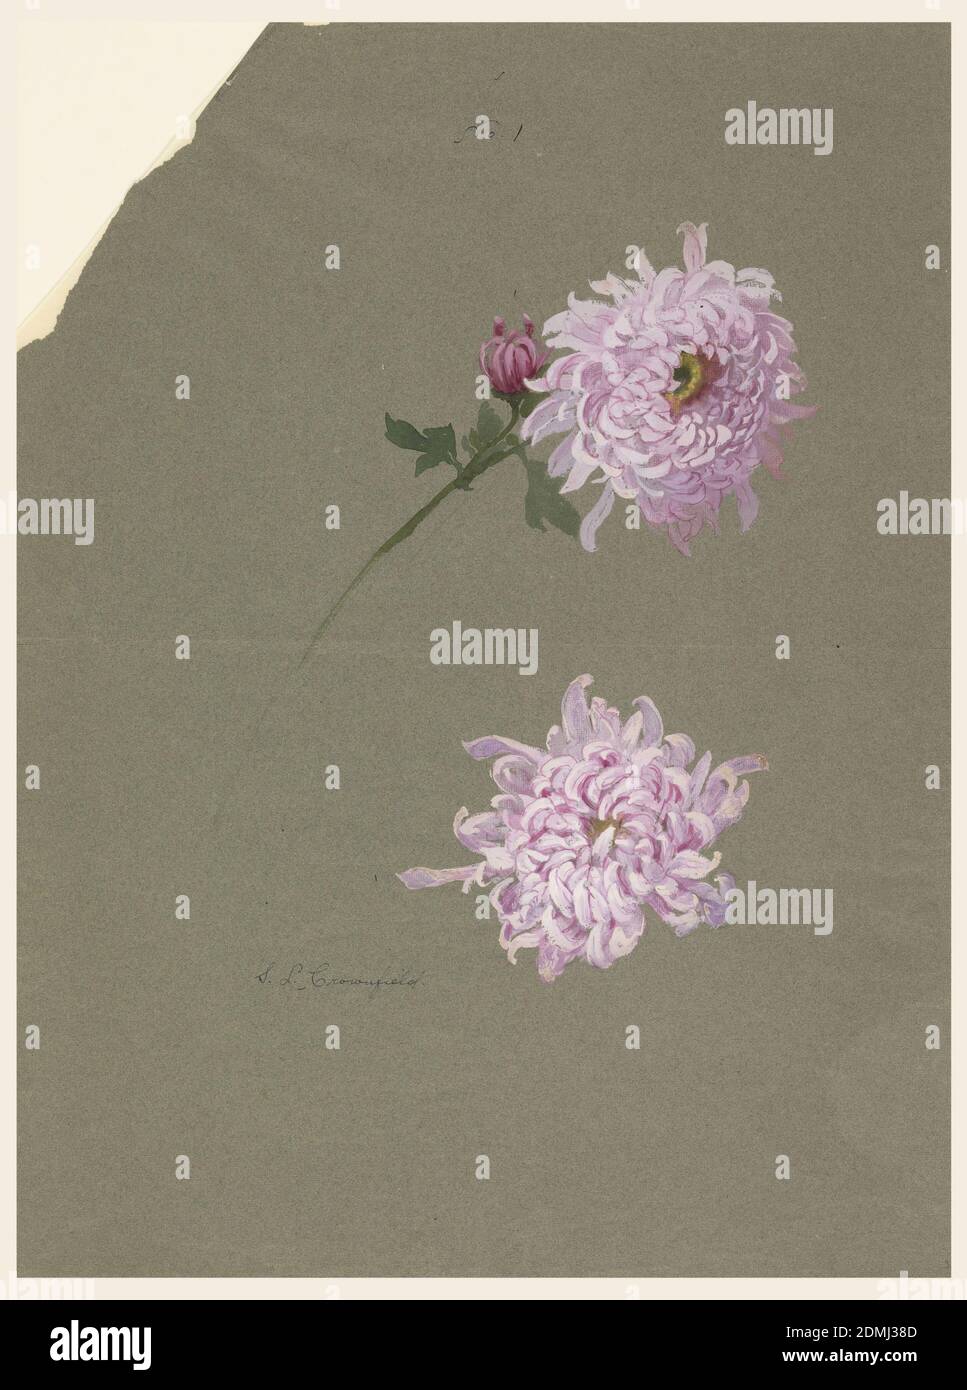 Two Studies of Violet Chrysanthemums, Sophia L. Crownfield, (American, 1862–1929), Brush and gouache on grey paper, Two violet chrysanthemum blossoms, one with stalk, leaf and bud in the center of the page., USA, early 20th century, nature studies, Drawing Stock Photo